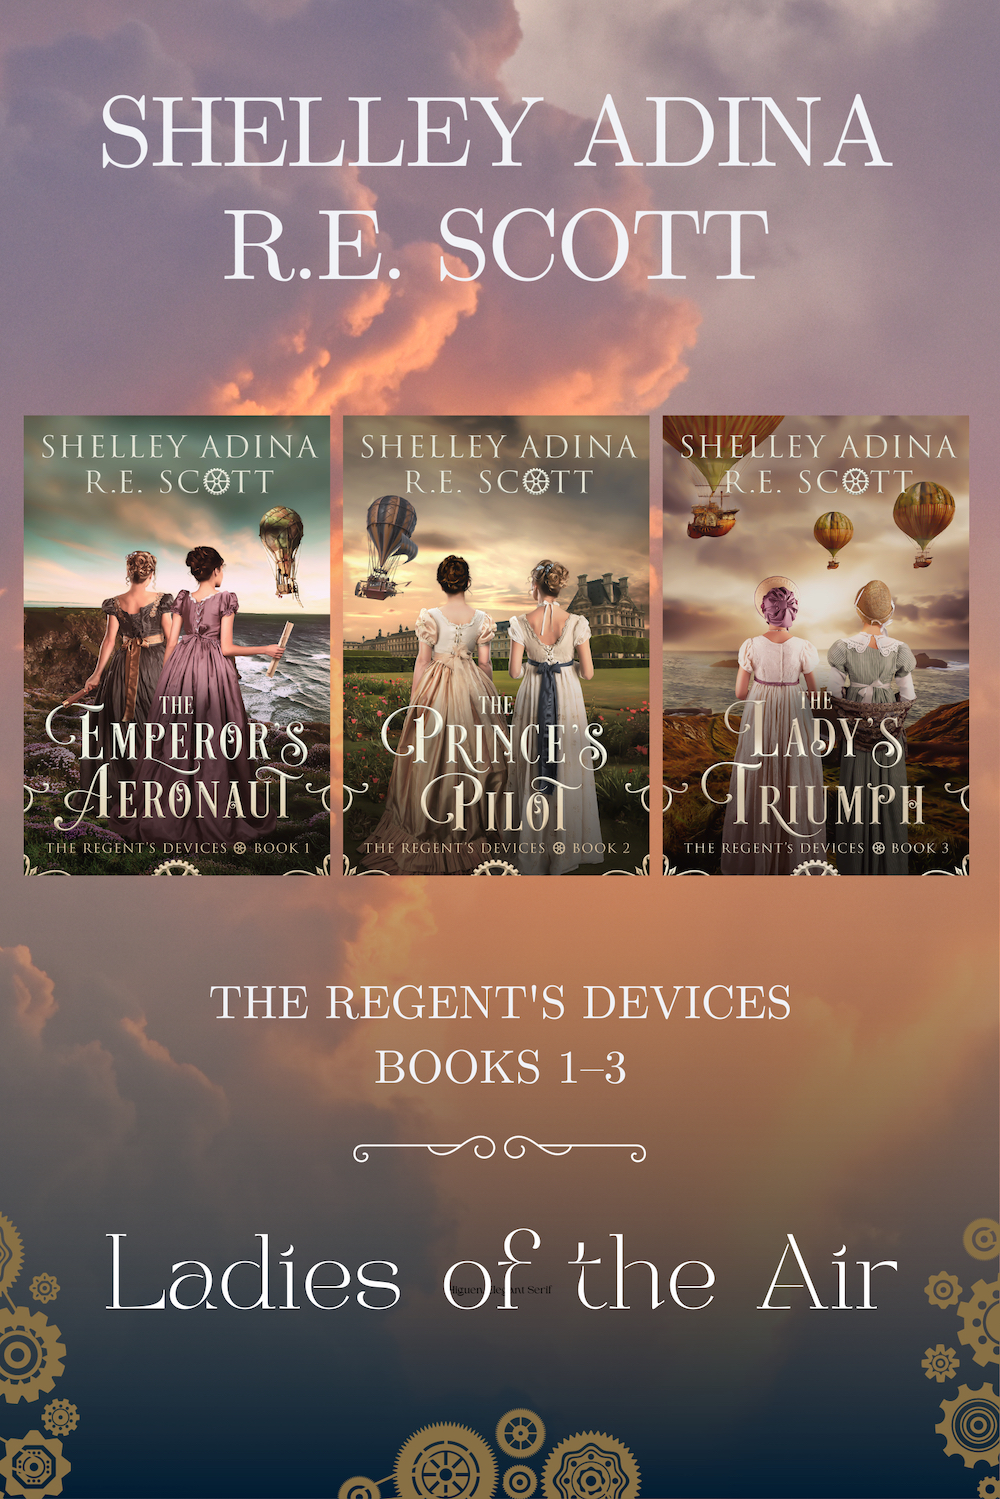 Ladies of the Air box set by Shelley Adina and R.E. Scott